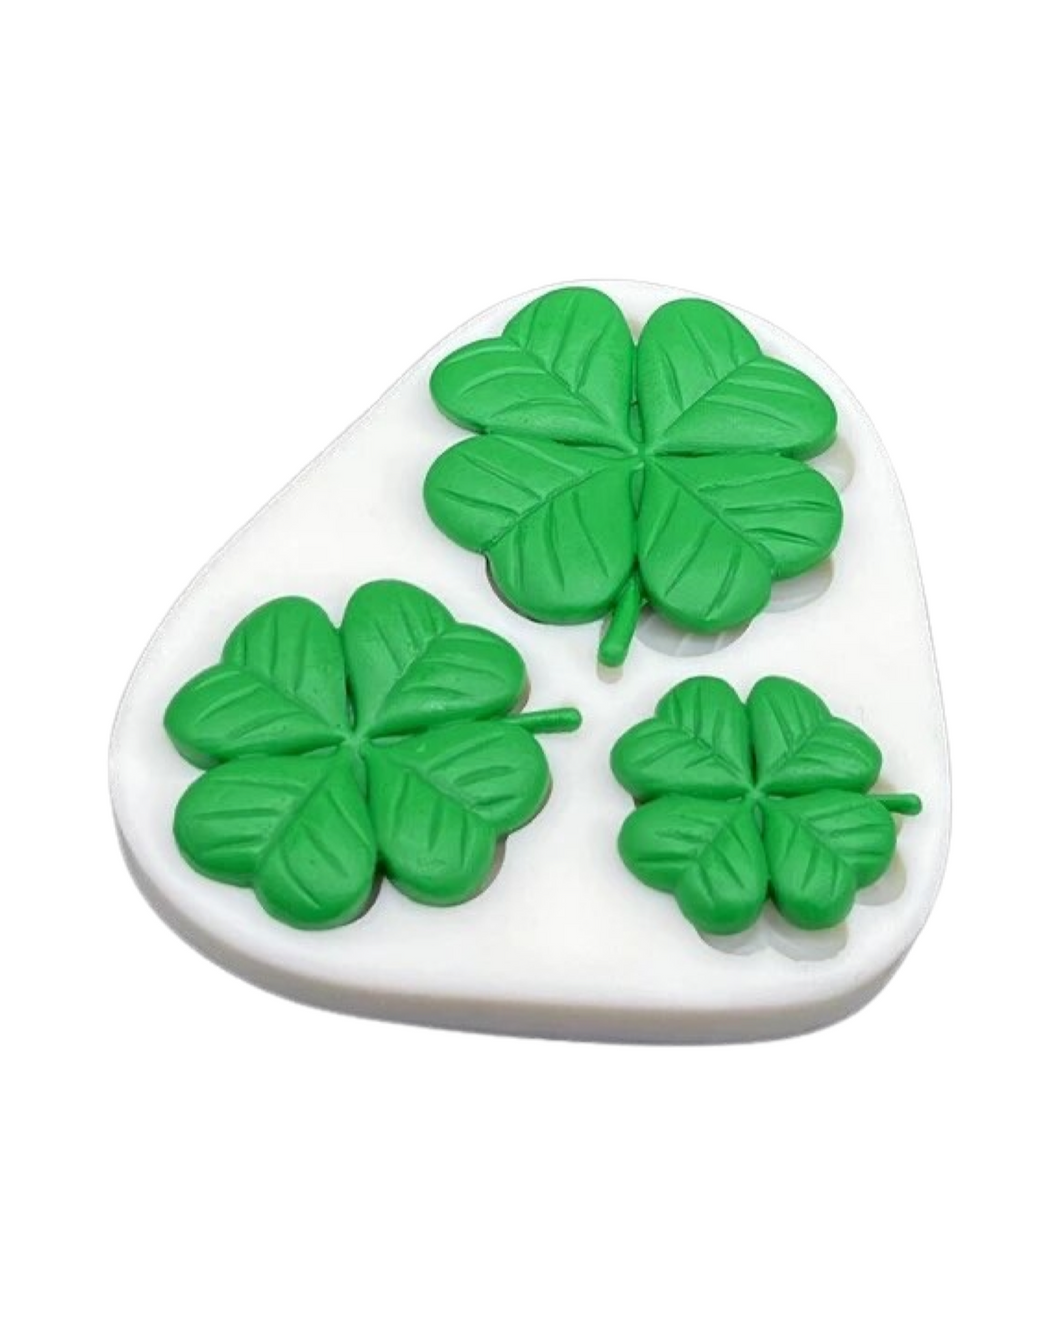 Clover leaves Silicone Mould lucky leaf St Patrick's Day Cake Fondant Sugarcraft Soap floral theme